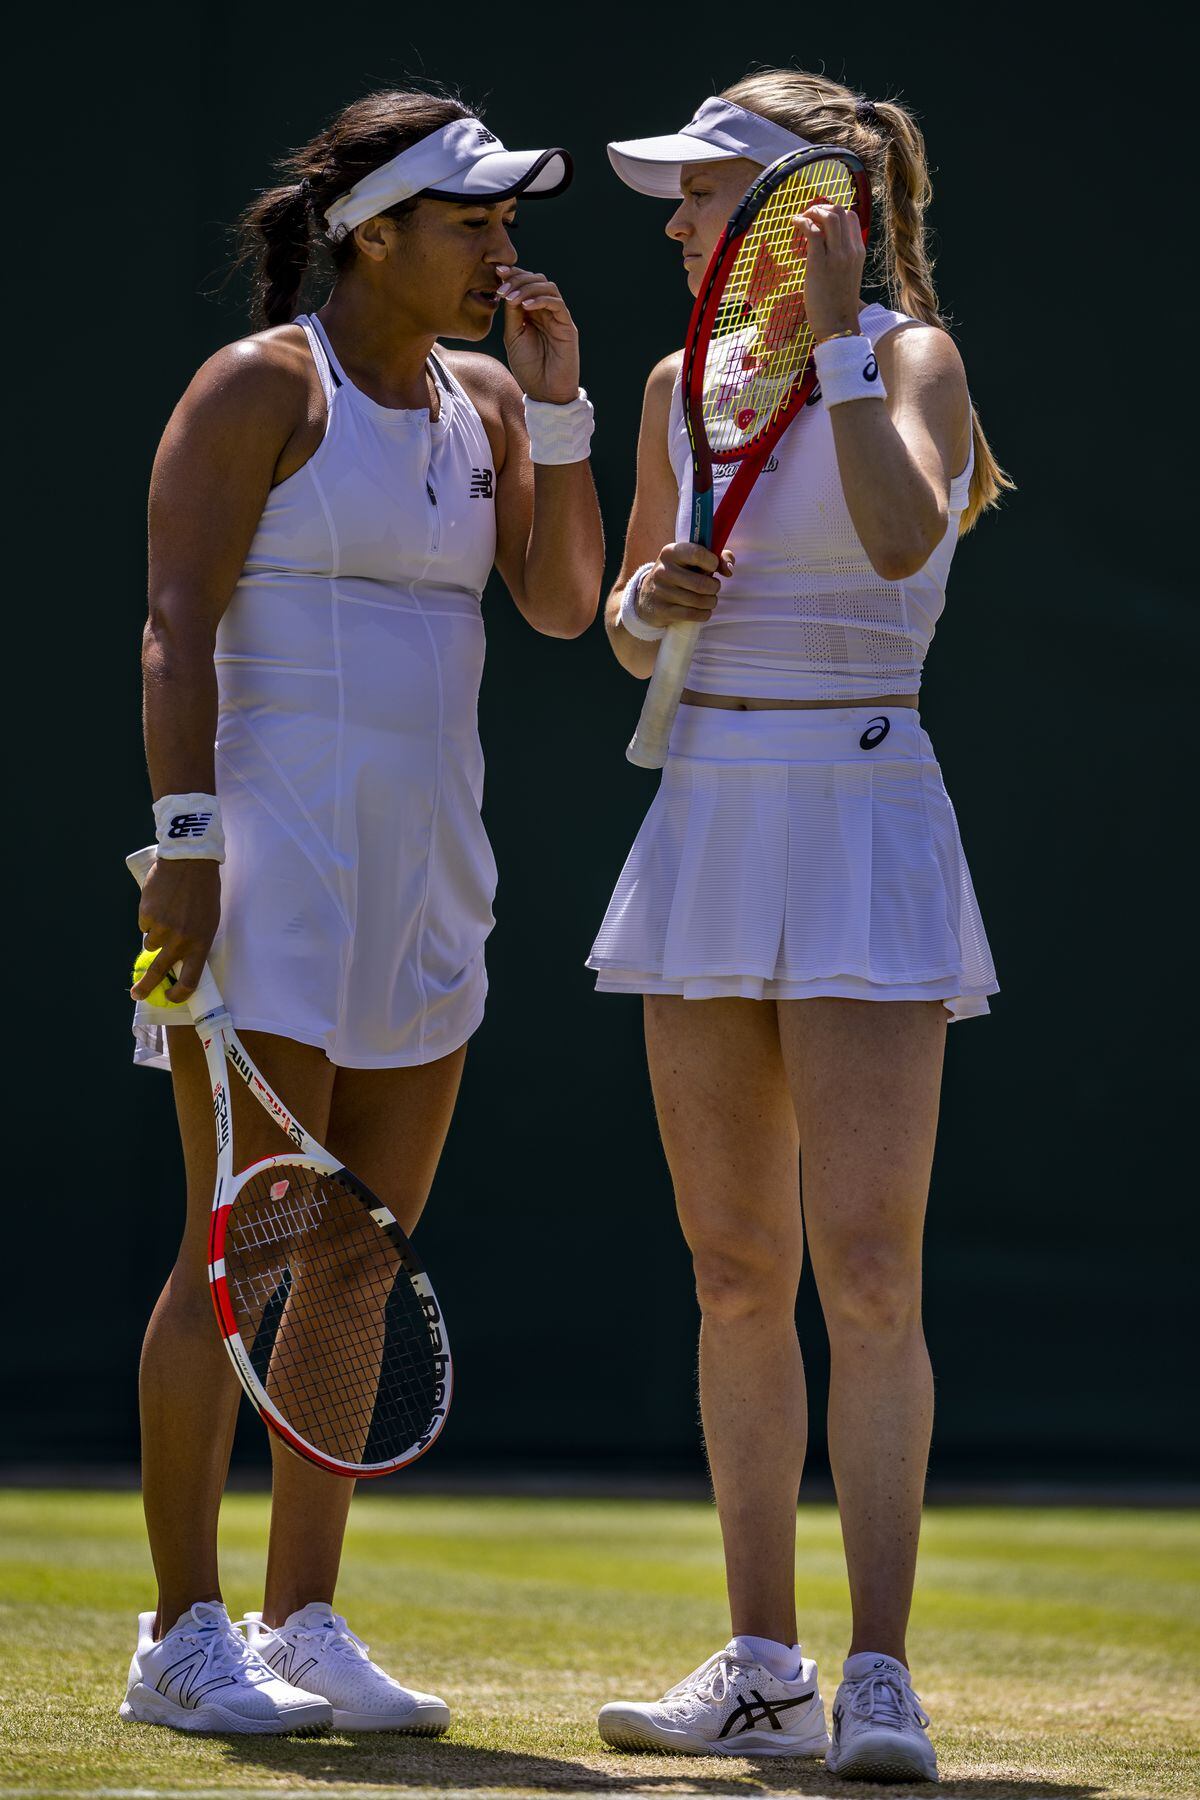 Doubles chat: Heather Watson and Harriet Dart in yesterday's last 16 match. (Picture by Press Association, 30997126)